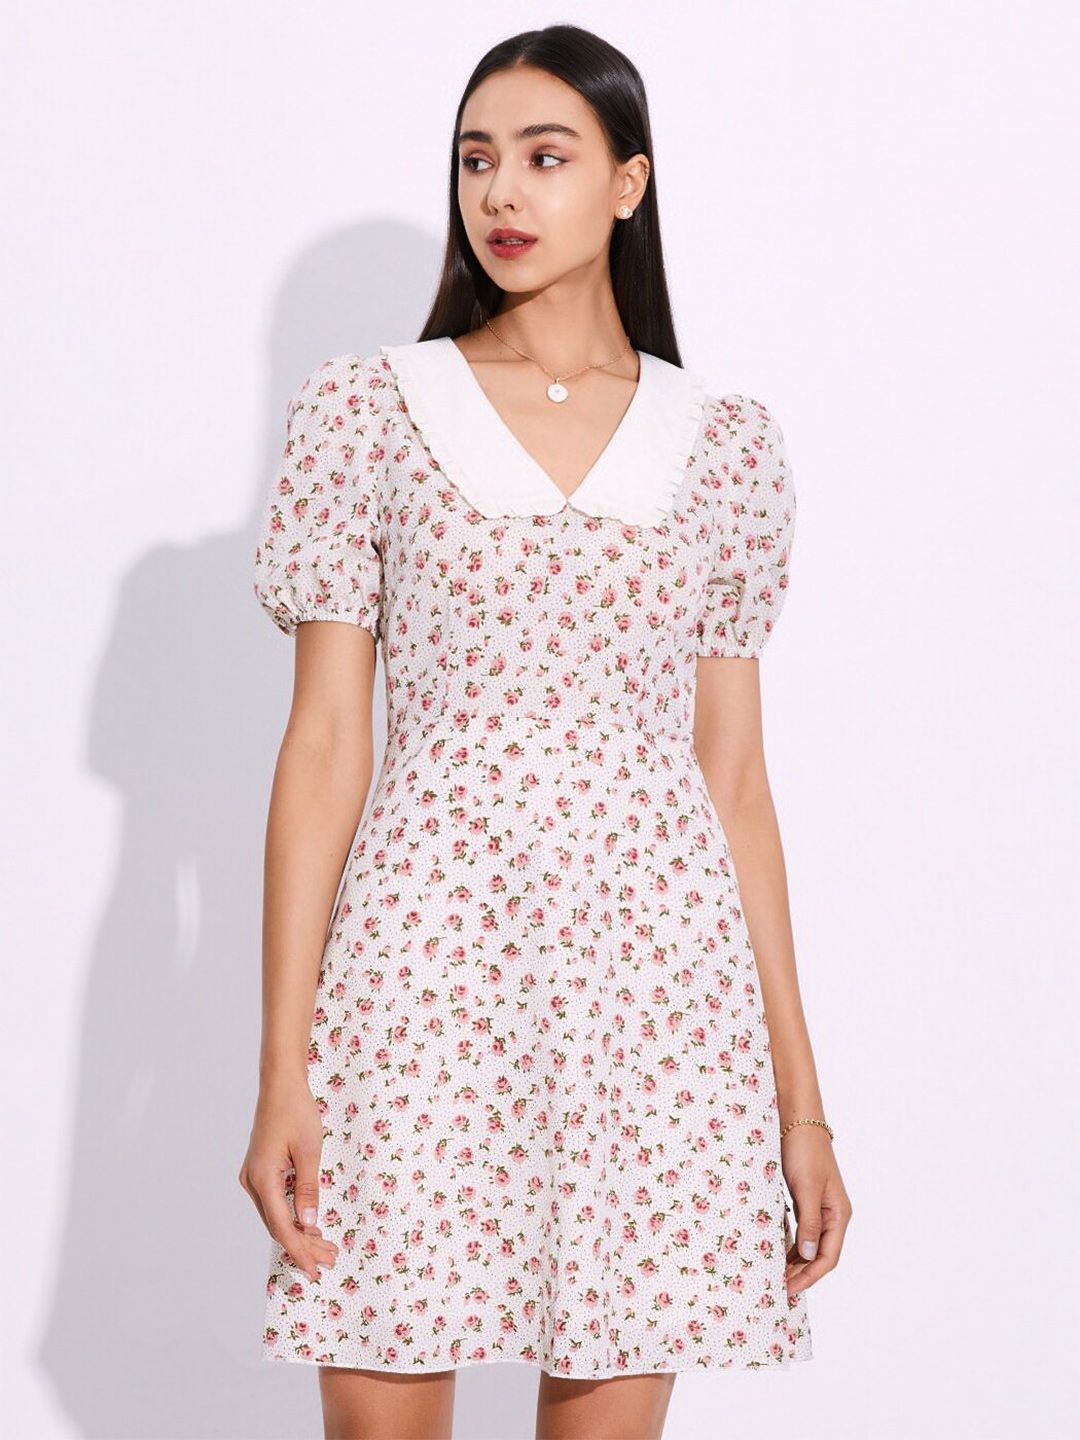 URBANIC Women White & Red Floral Printed Dress Price in India